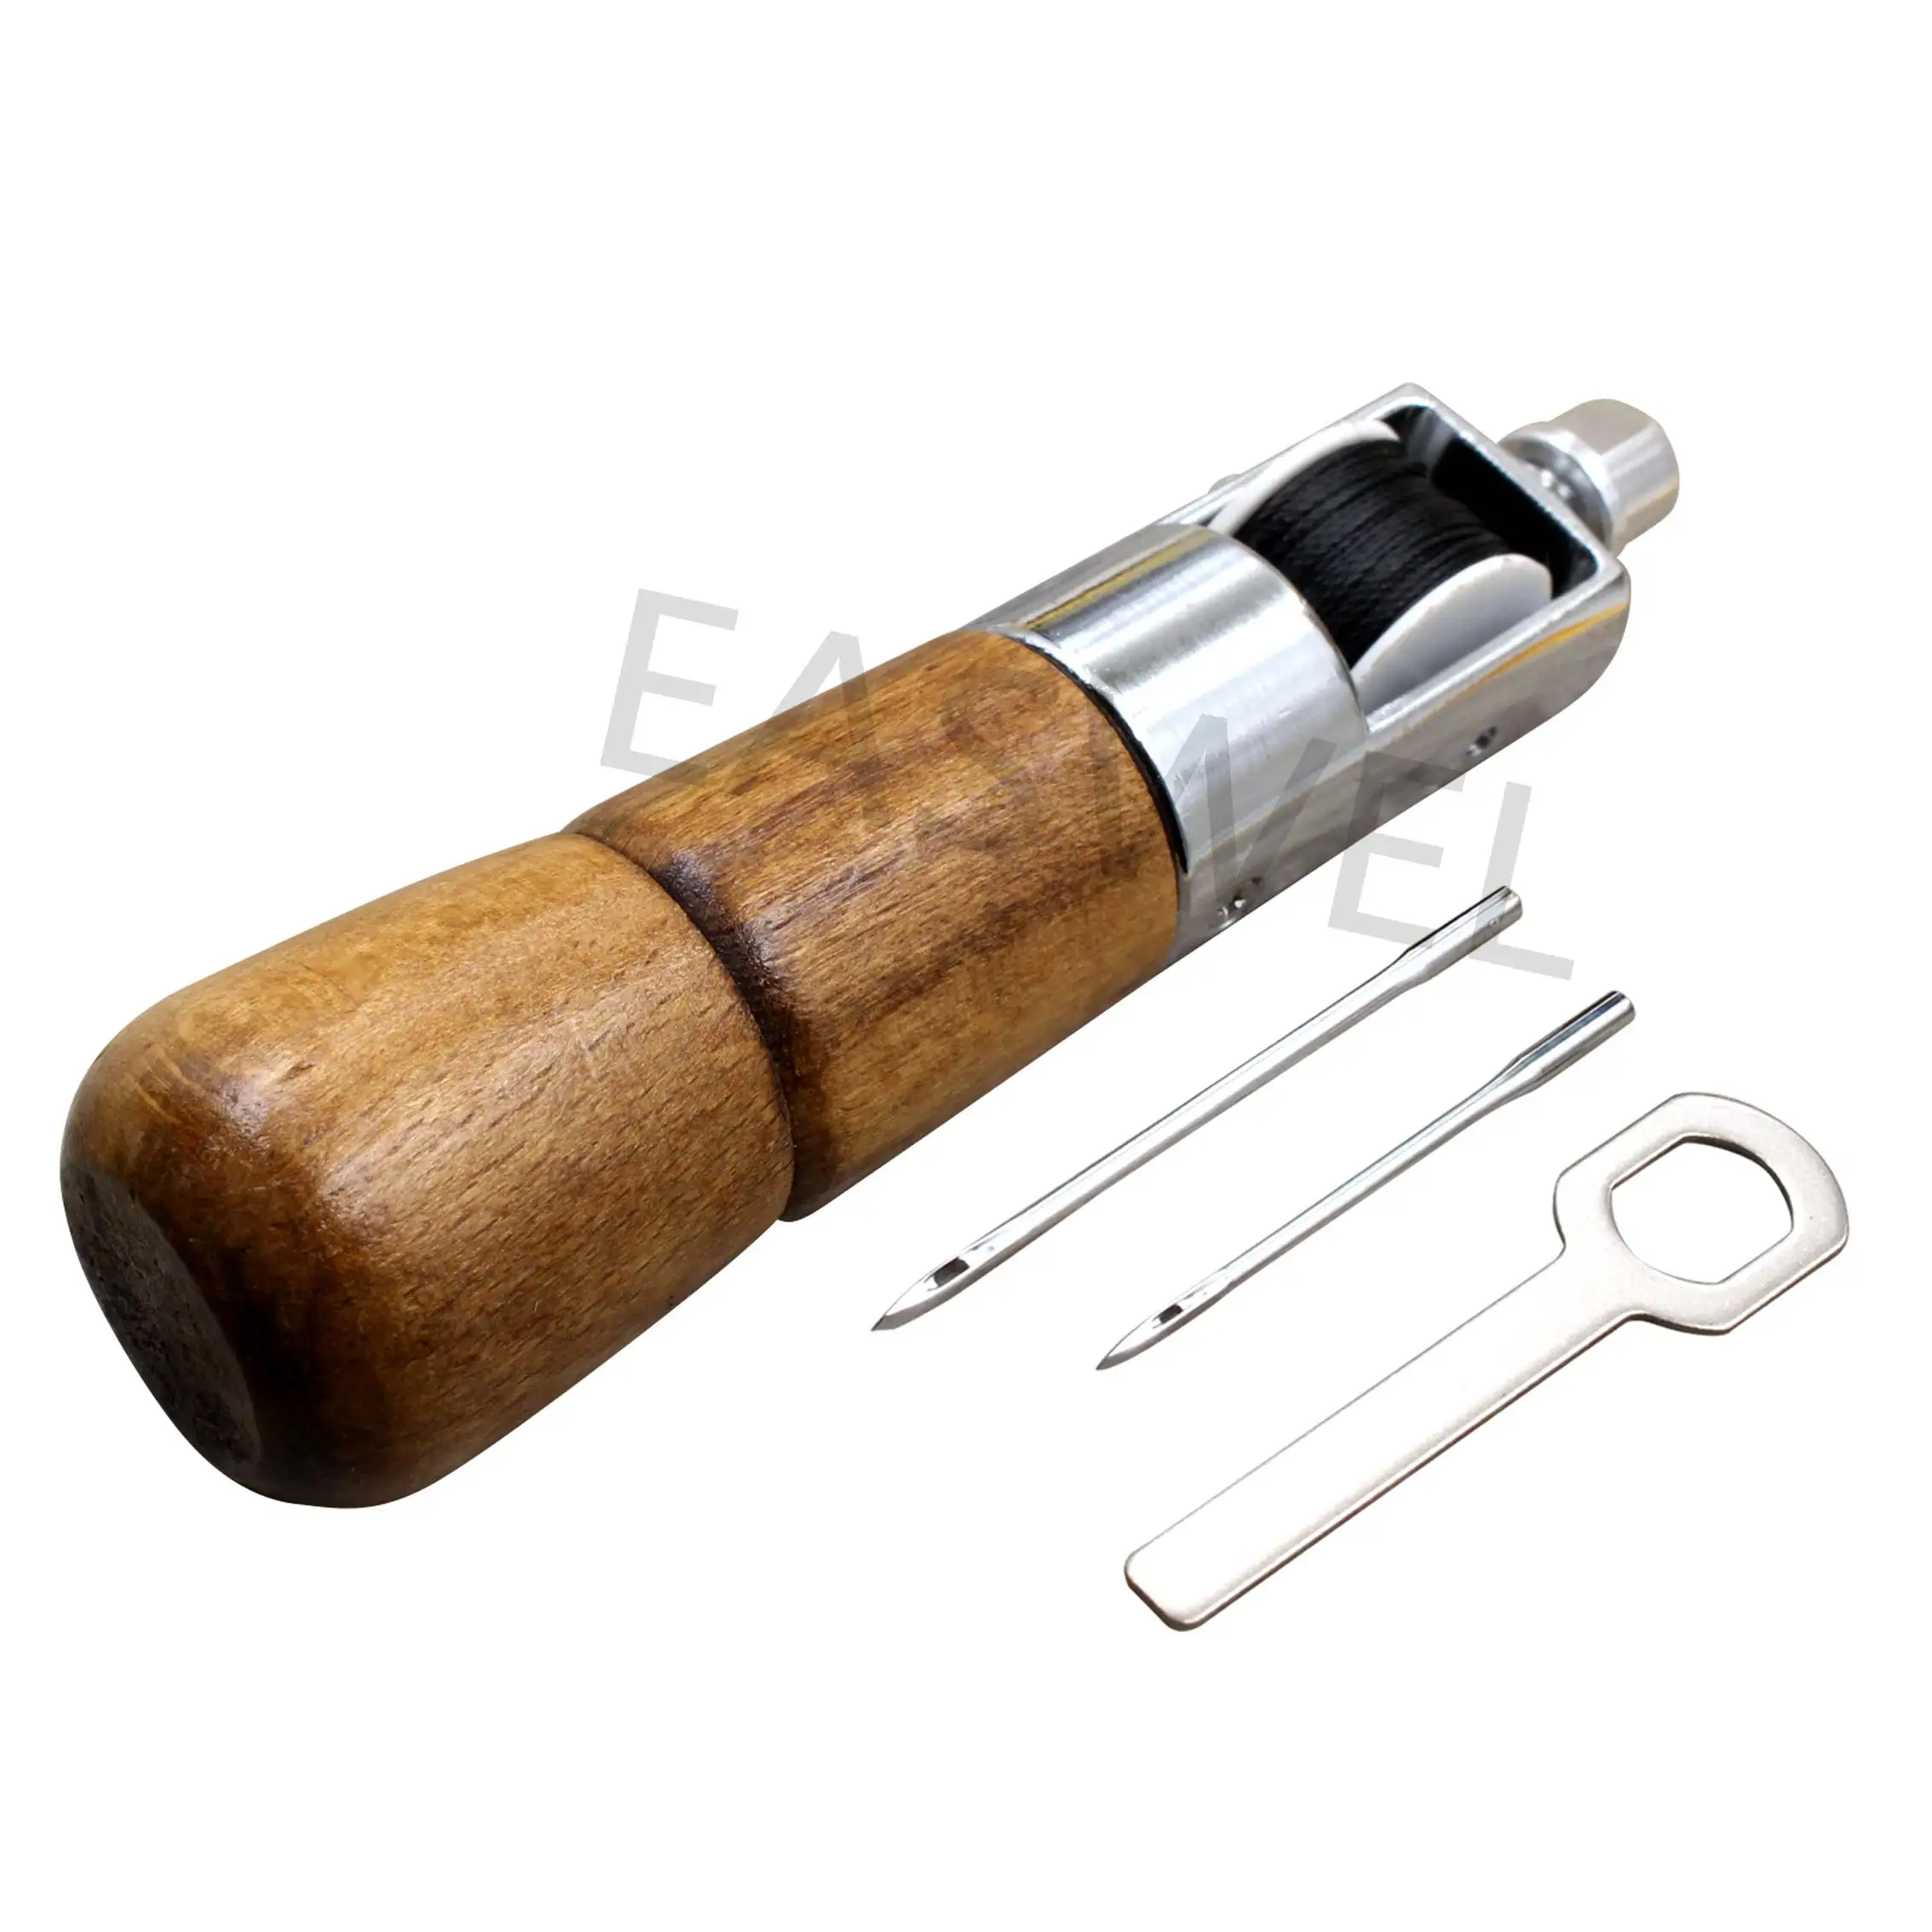 ShineBear Professional Stitcher Sewing Awl Hand Stitcher Repair Tool Kit for Leather and Heavy Fabrics Wood Handle Repair Drillable Round Color: Slender Awl 